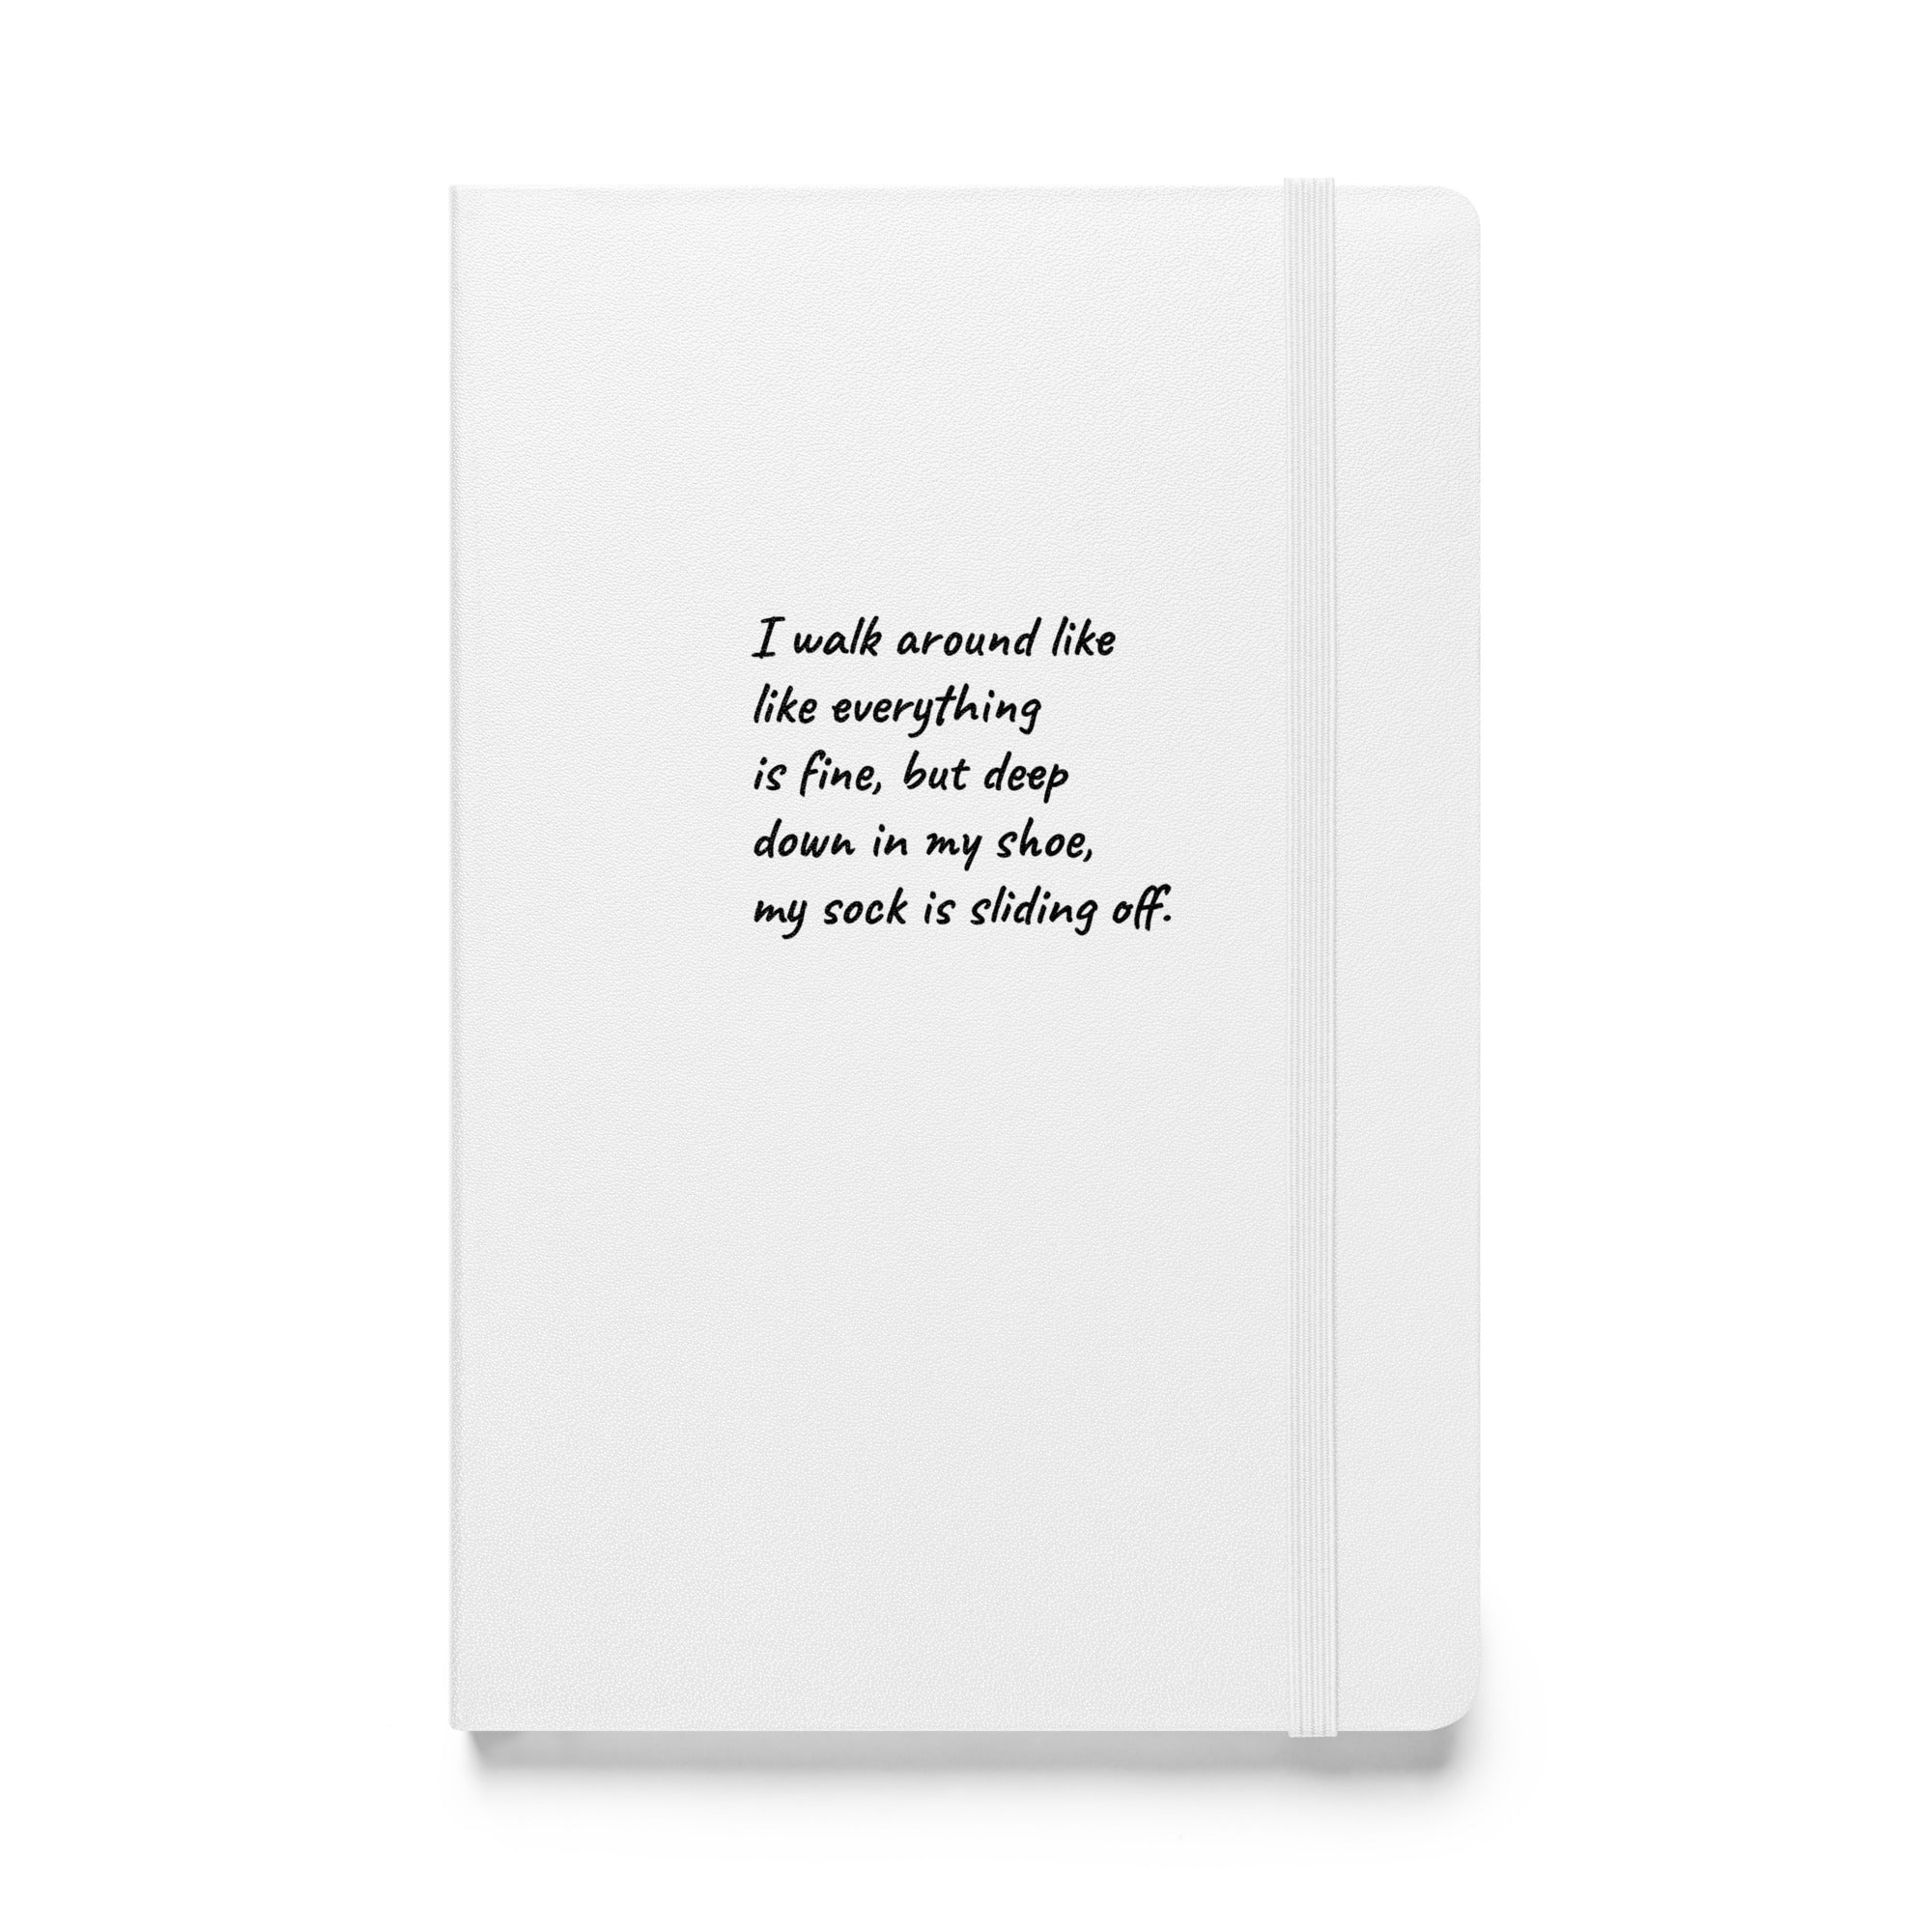 Sock is Falling Off - Hardcover Notebook Journal